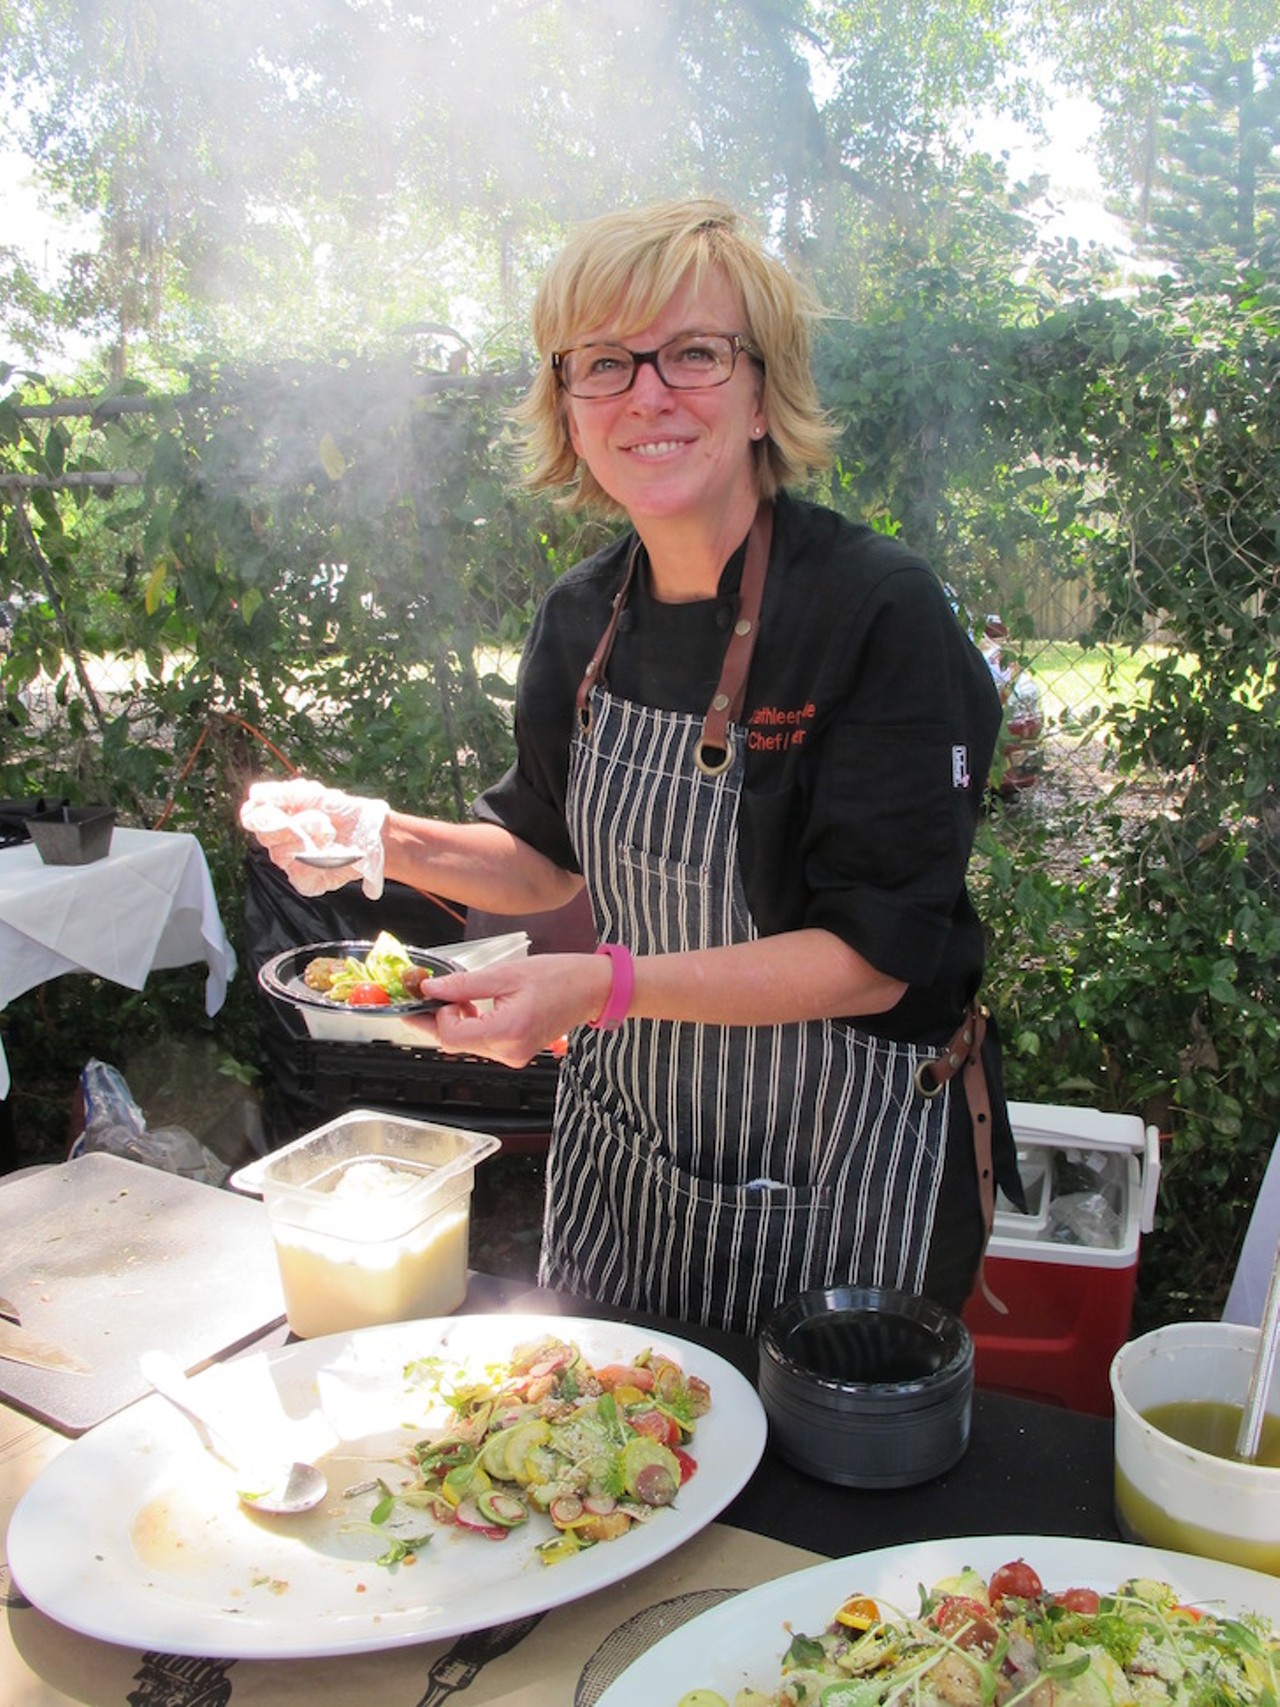 Chef Kathleen Blake of the Rusty Spoon plating summer squash and tomato panzanella with almond crumbs and ramp vinaigrette